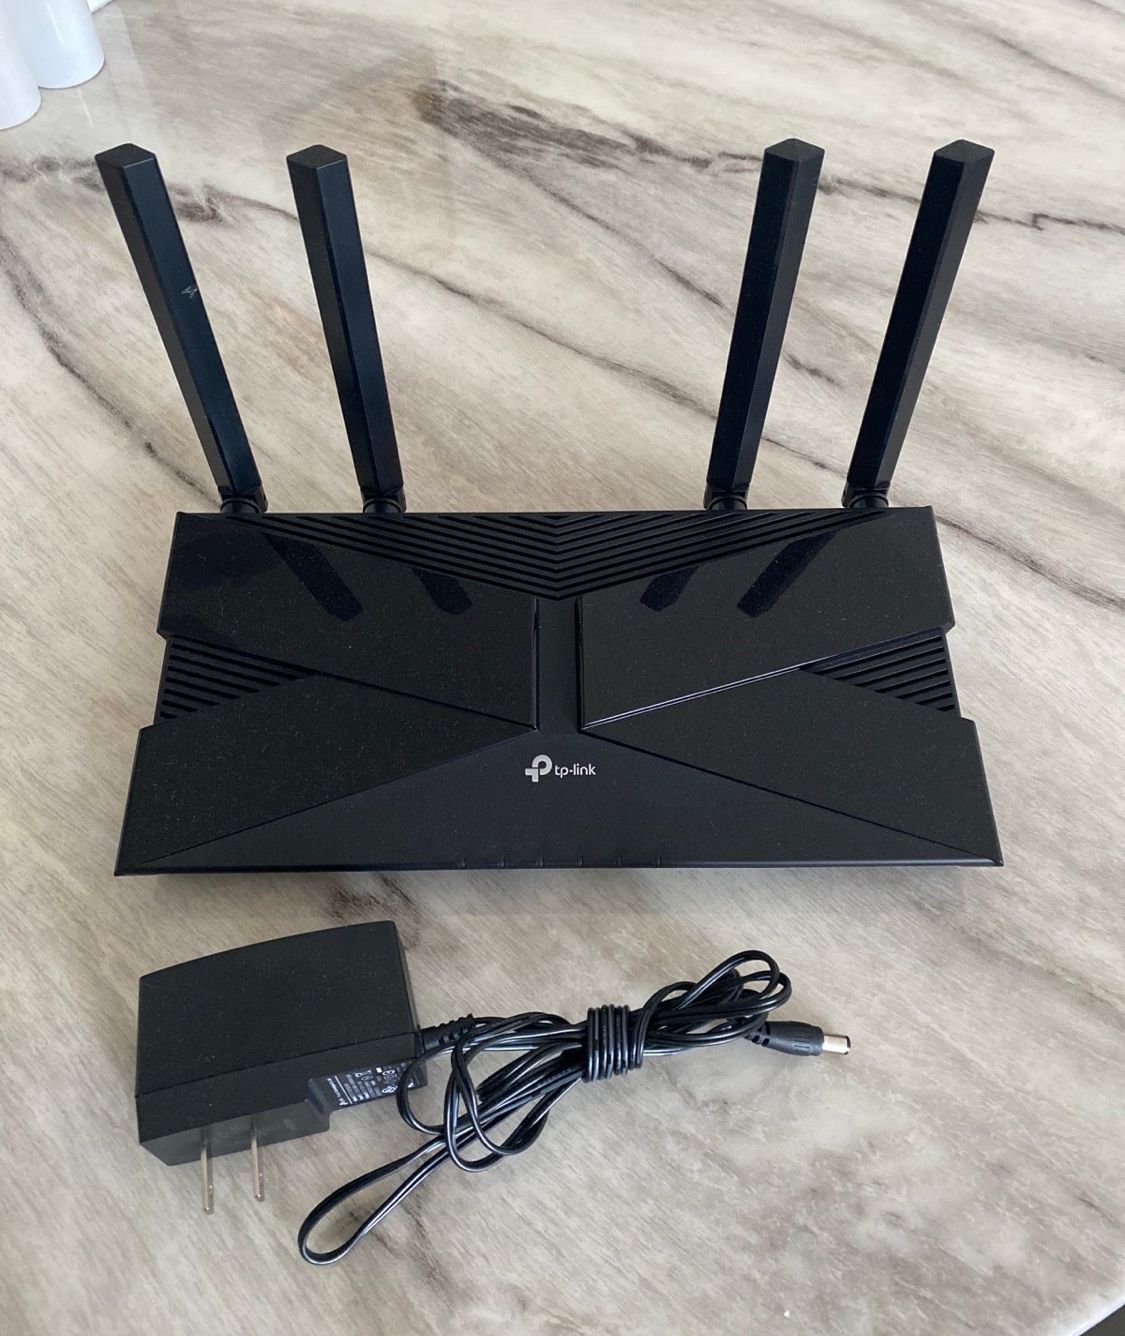 TP-Link Router AX 1800 (LIKE NEW)